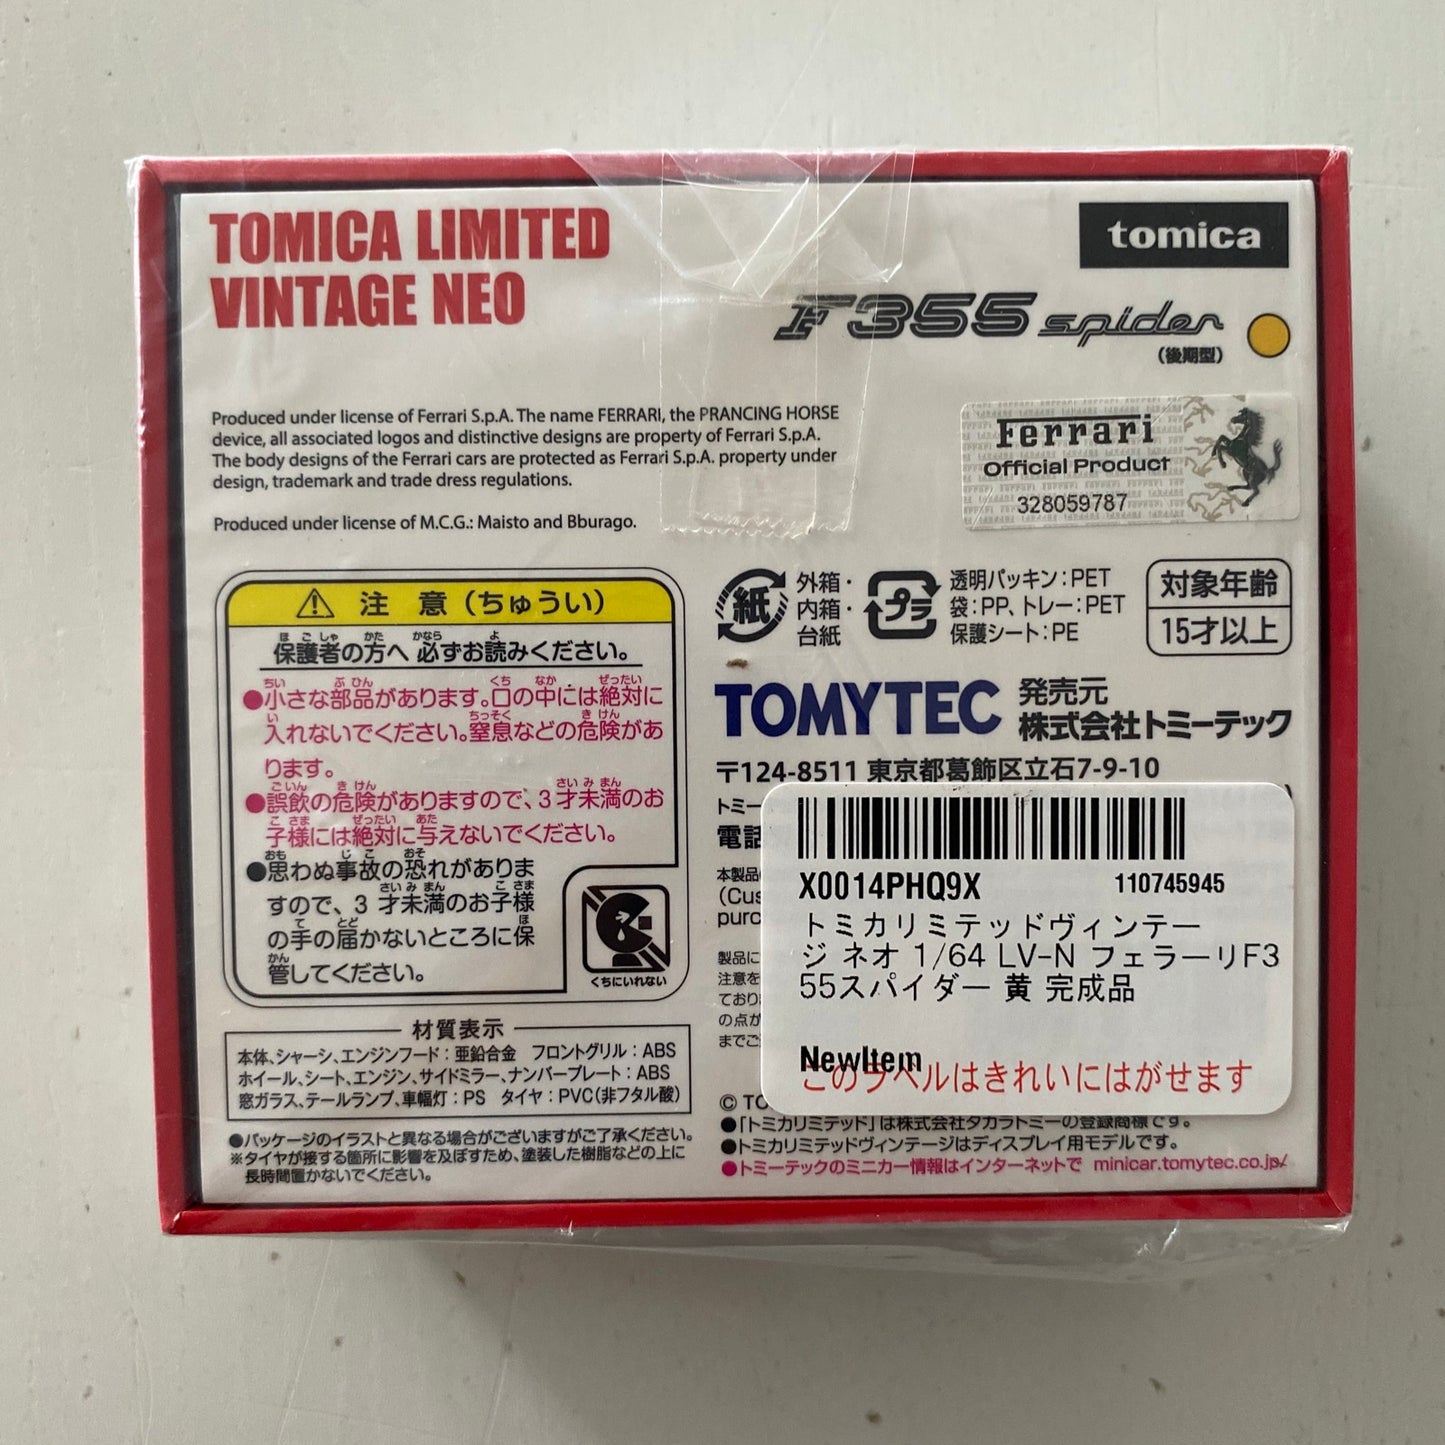 TOMICA Limited Vintage Neo - Ferrari F355 Spider (Yellow - 1/64 Scale) EE26